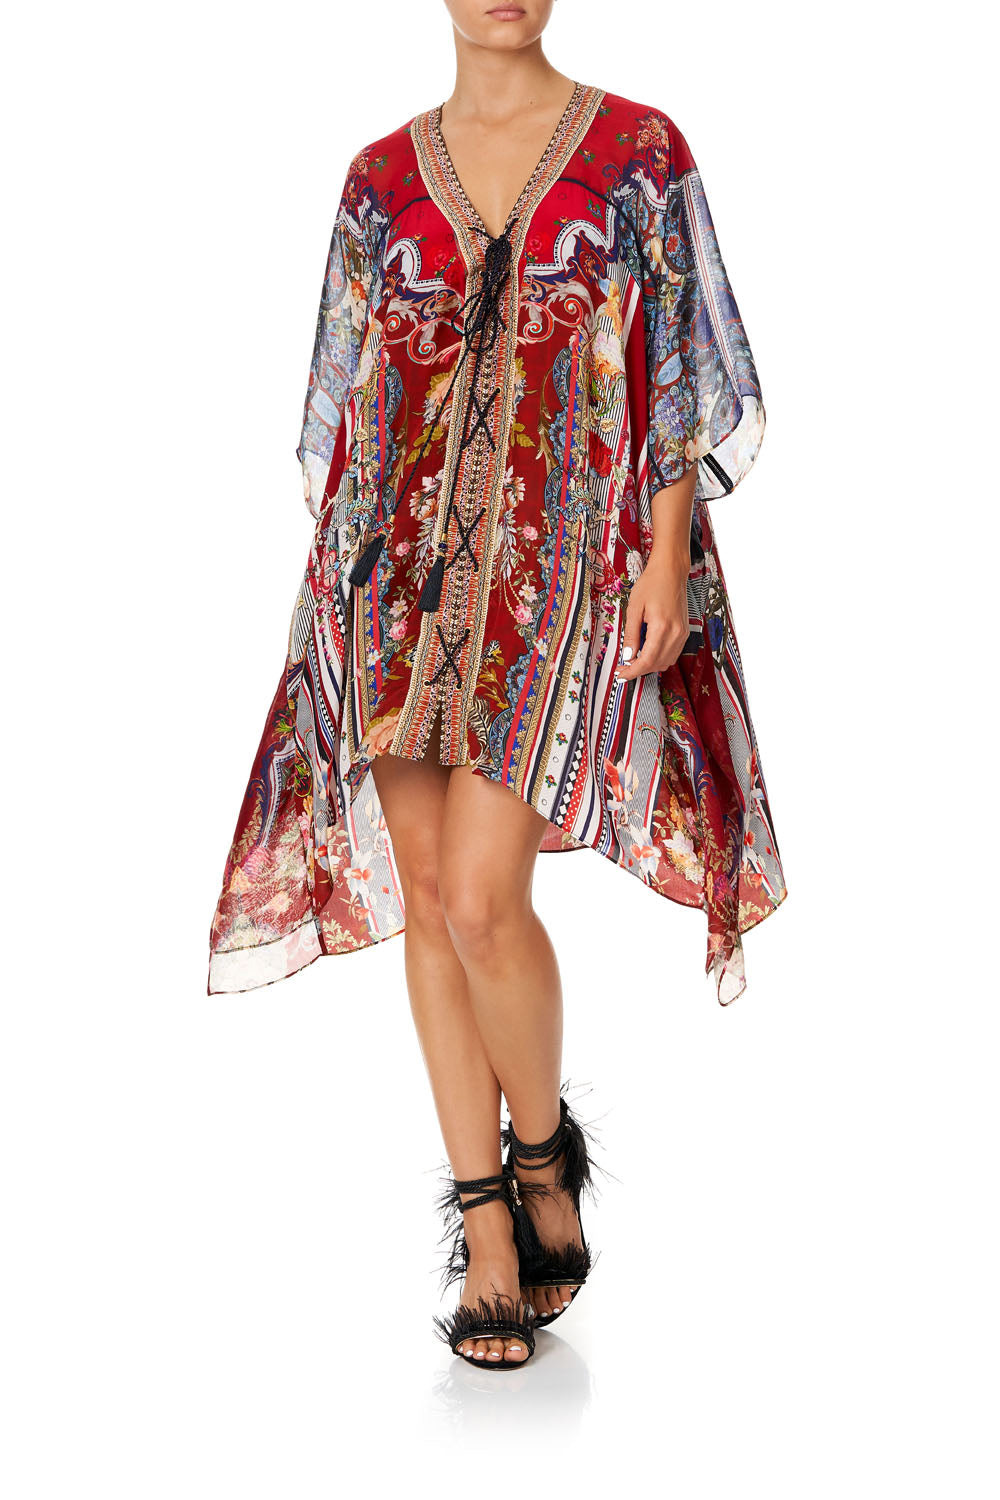 LACE UP KAFTAN WITH INSERT TRIM COSTUME PARTY